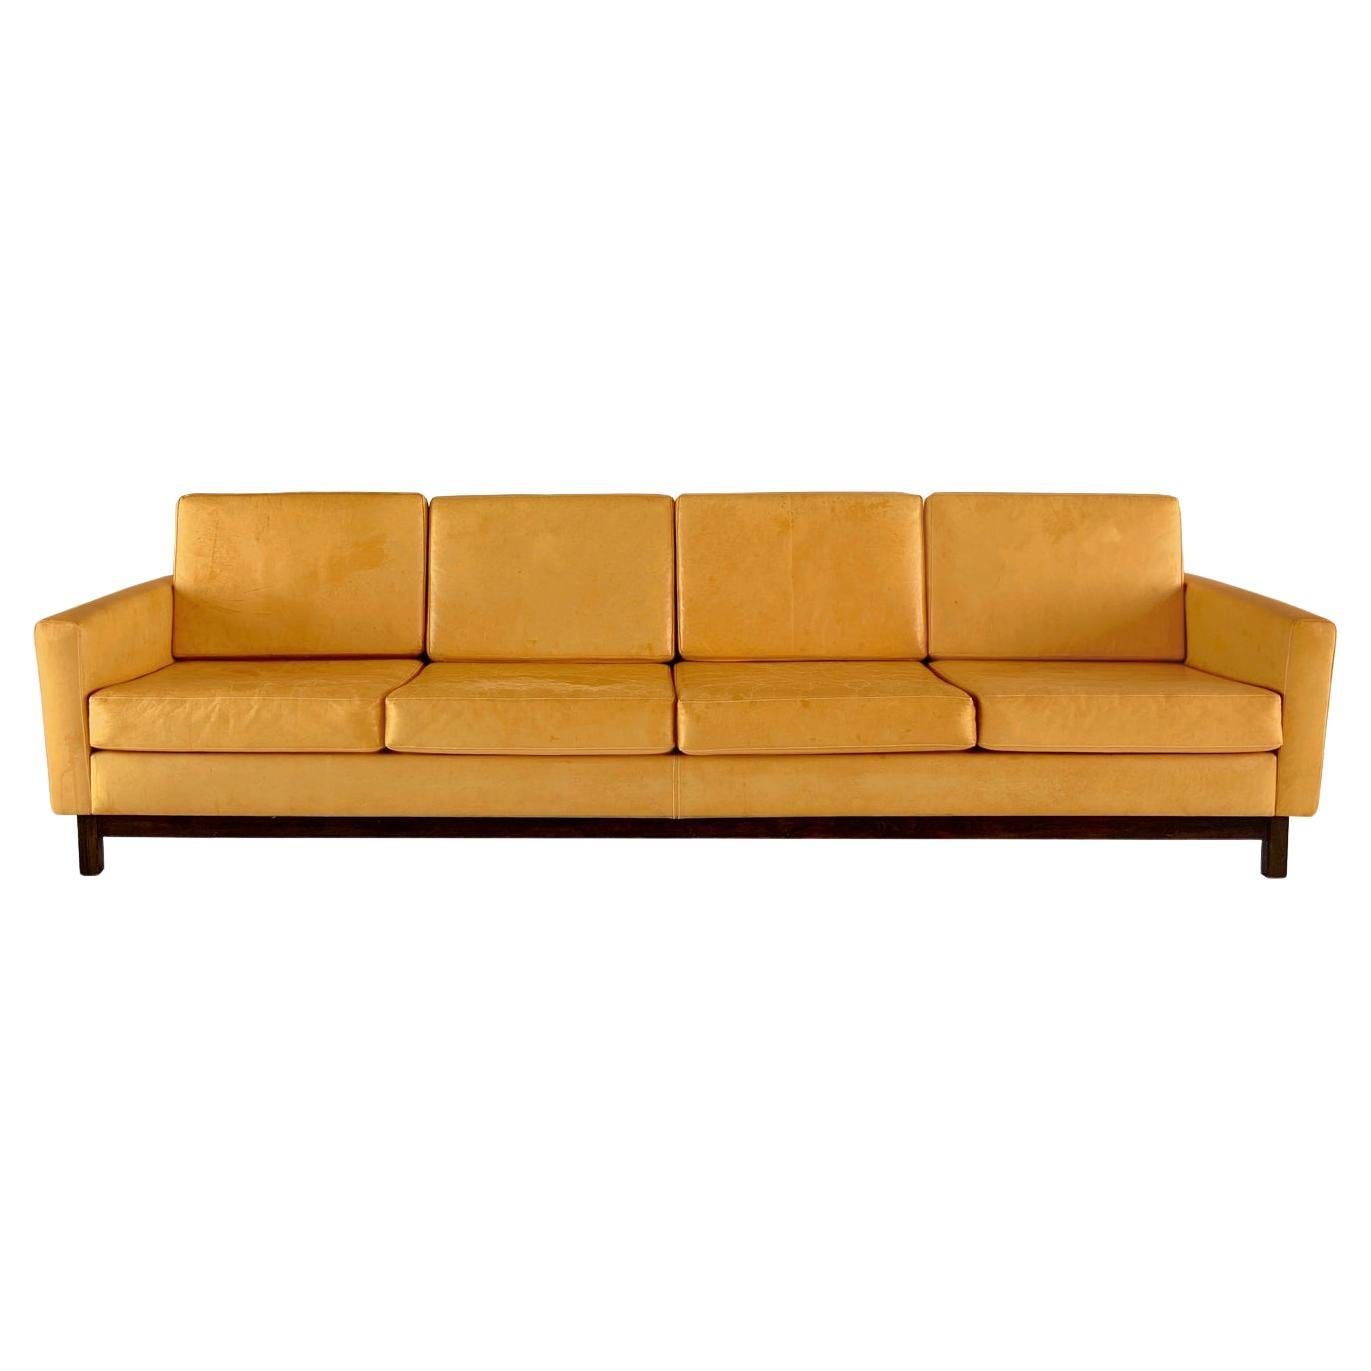 Anacastro Sofa by Sergio Rodrigues, 1960s For Sale